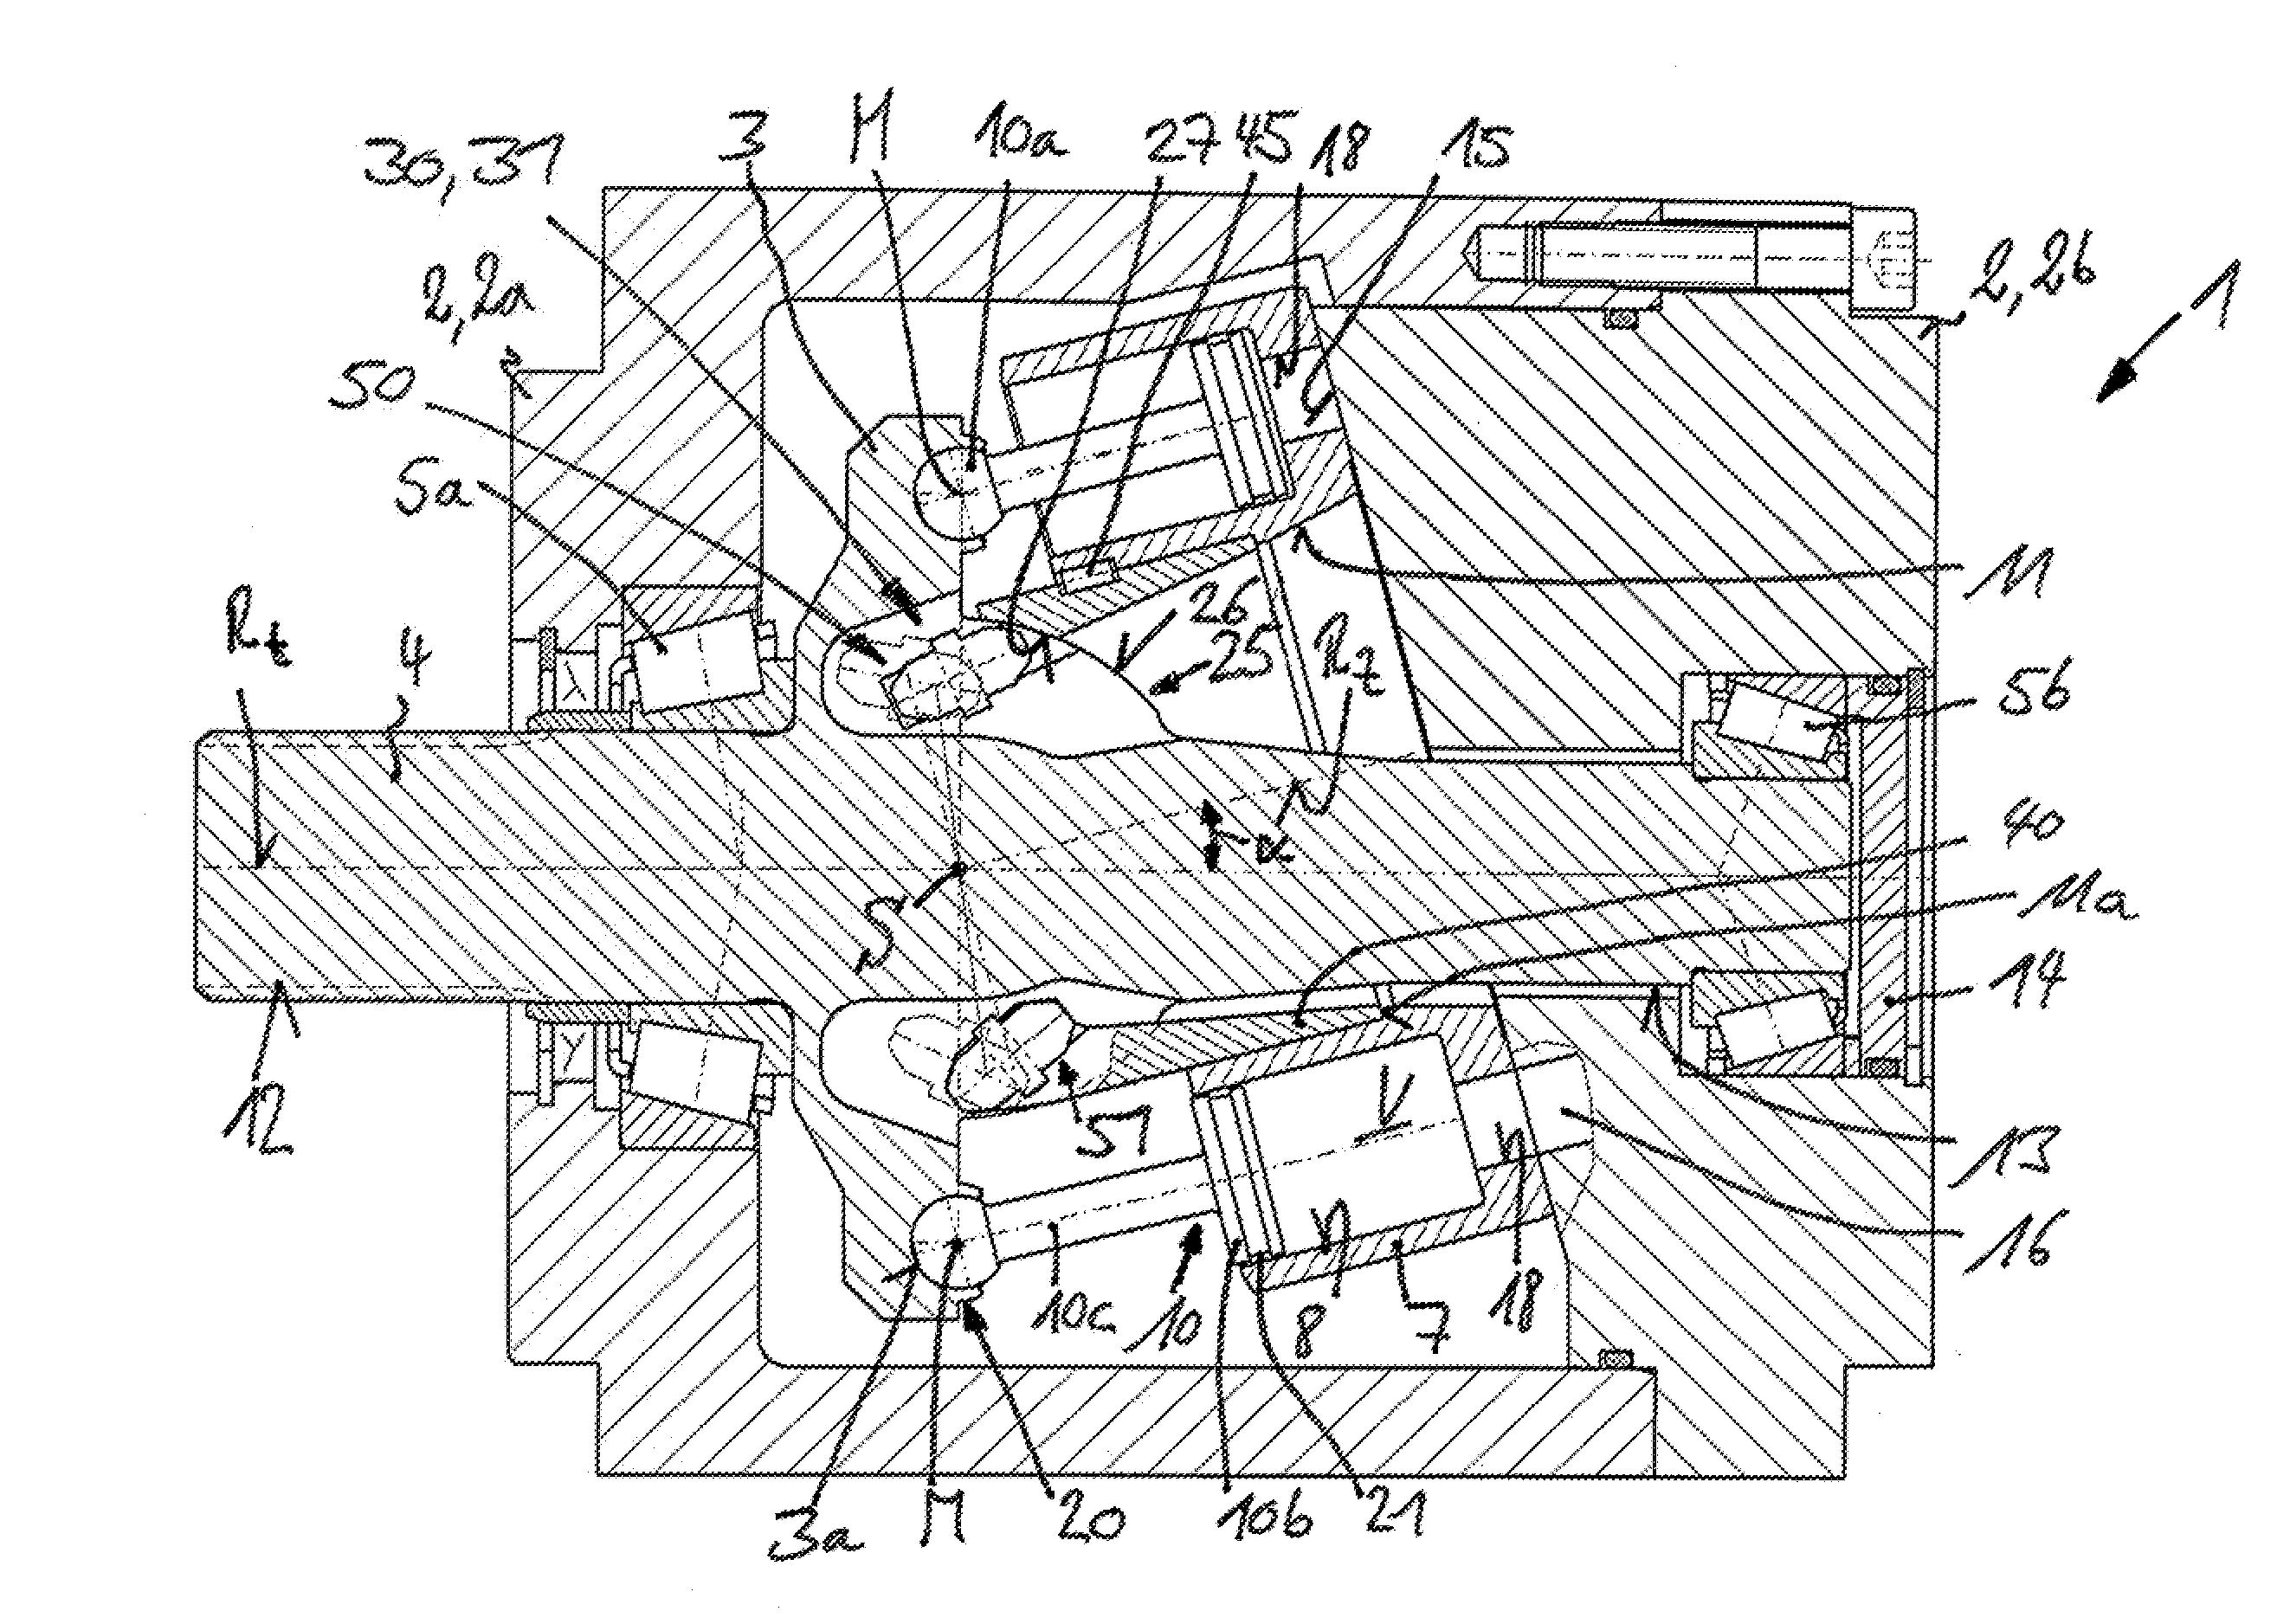 Hydrostatic Axial Piston Machine Employing A Bent-Axis Construction